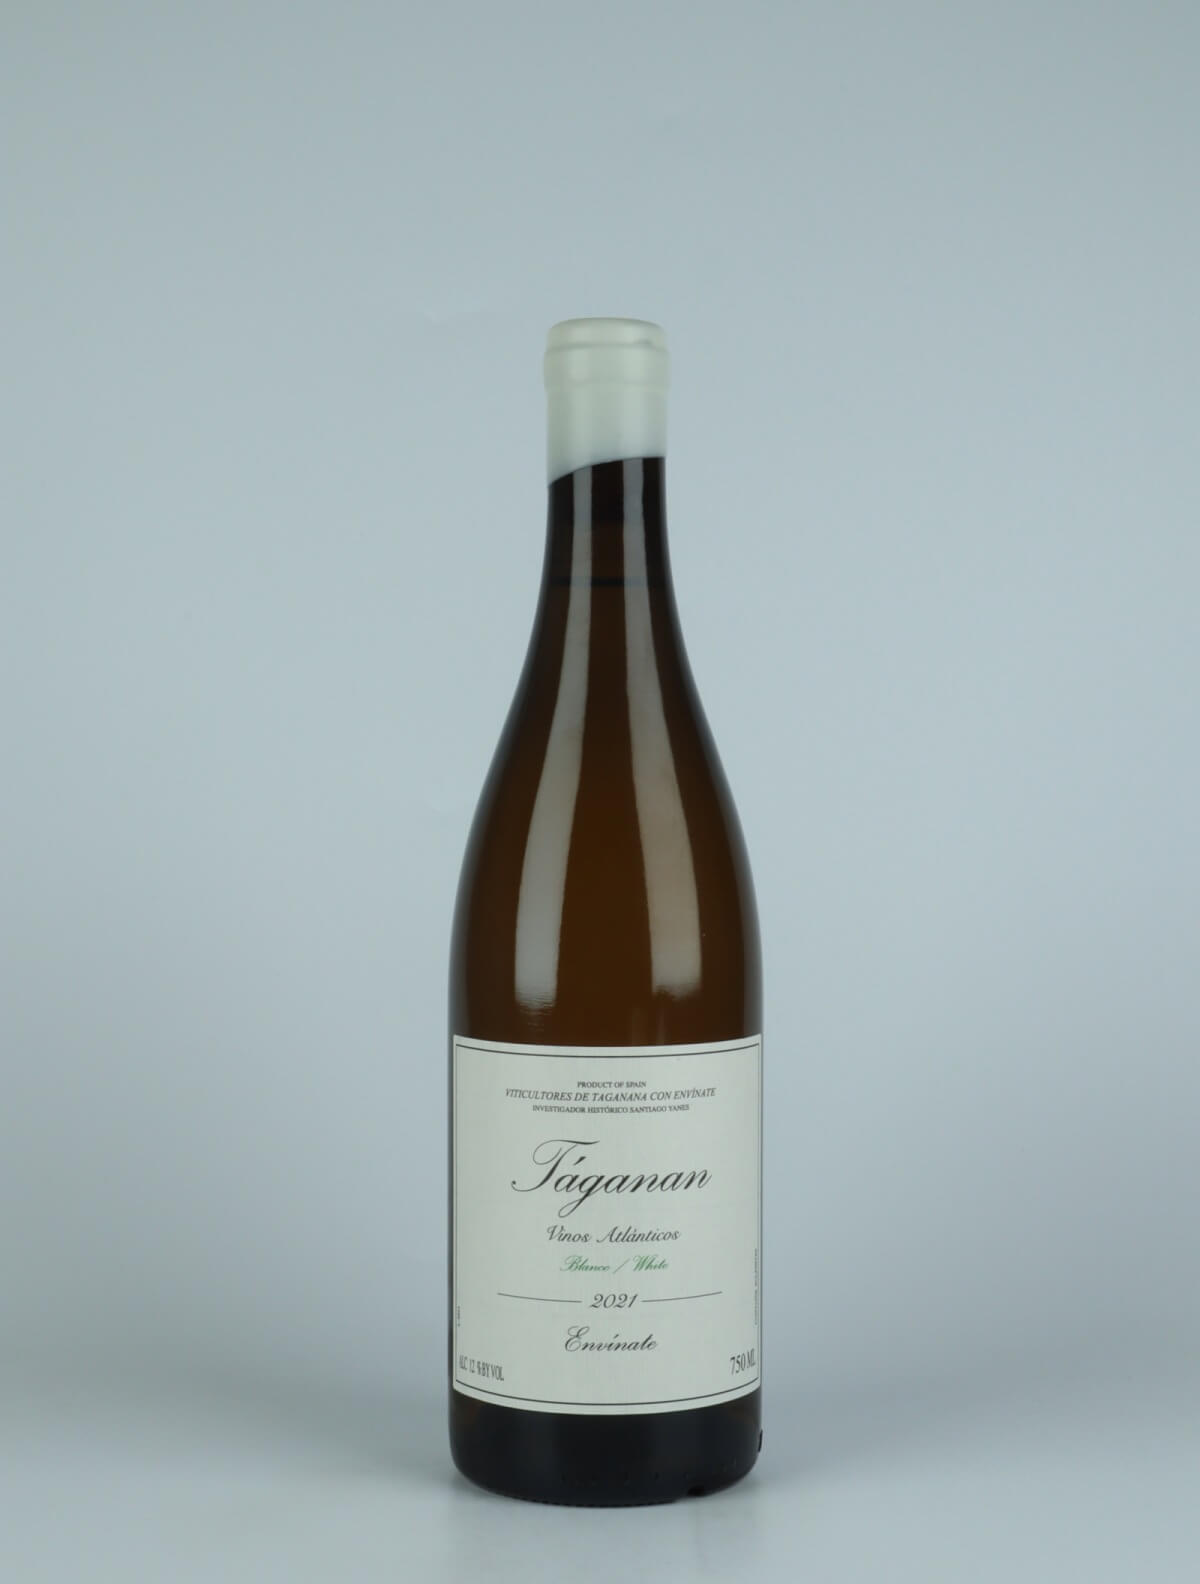 A bottle 2021 Taganan Blanco - Tenerife White wine from Envínate,  in Spain